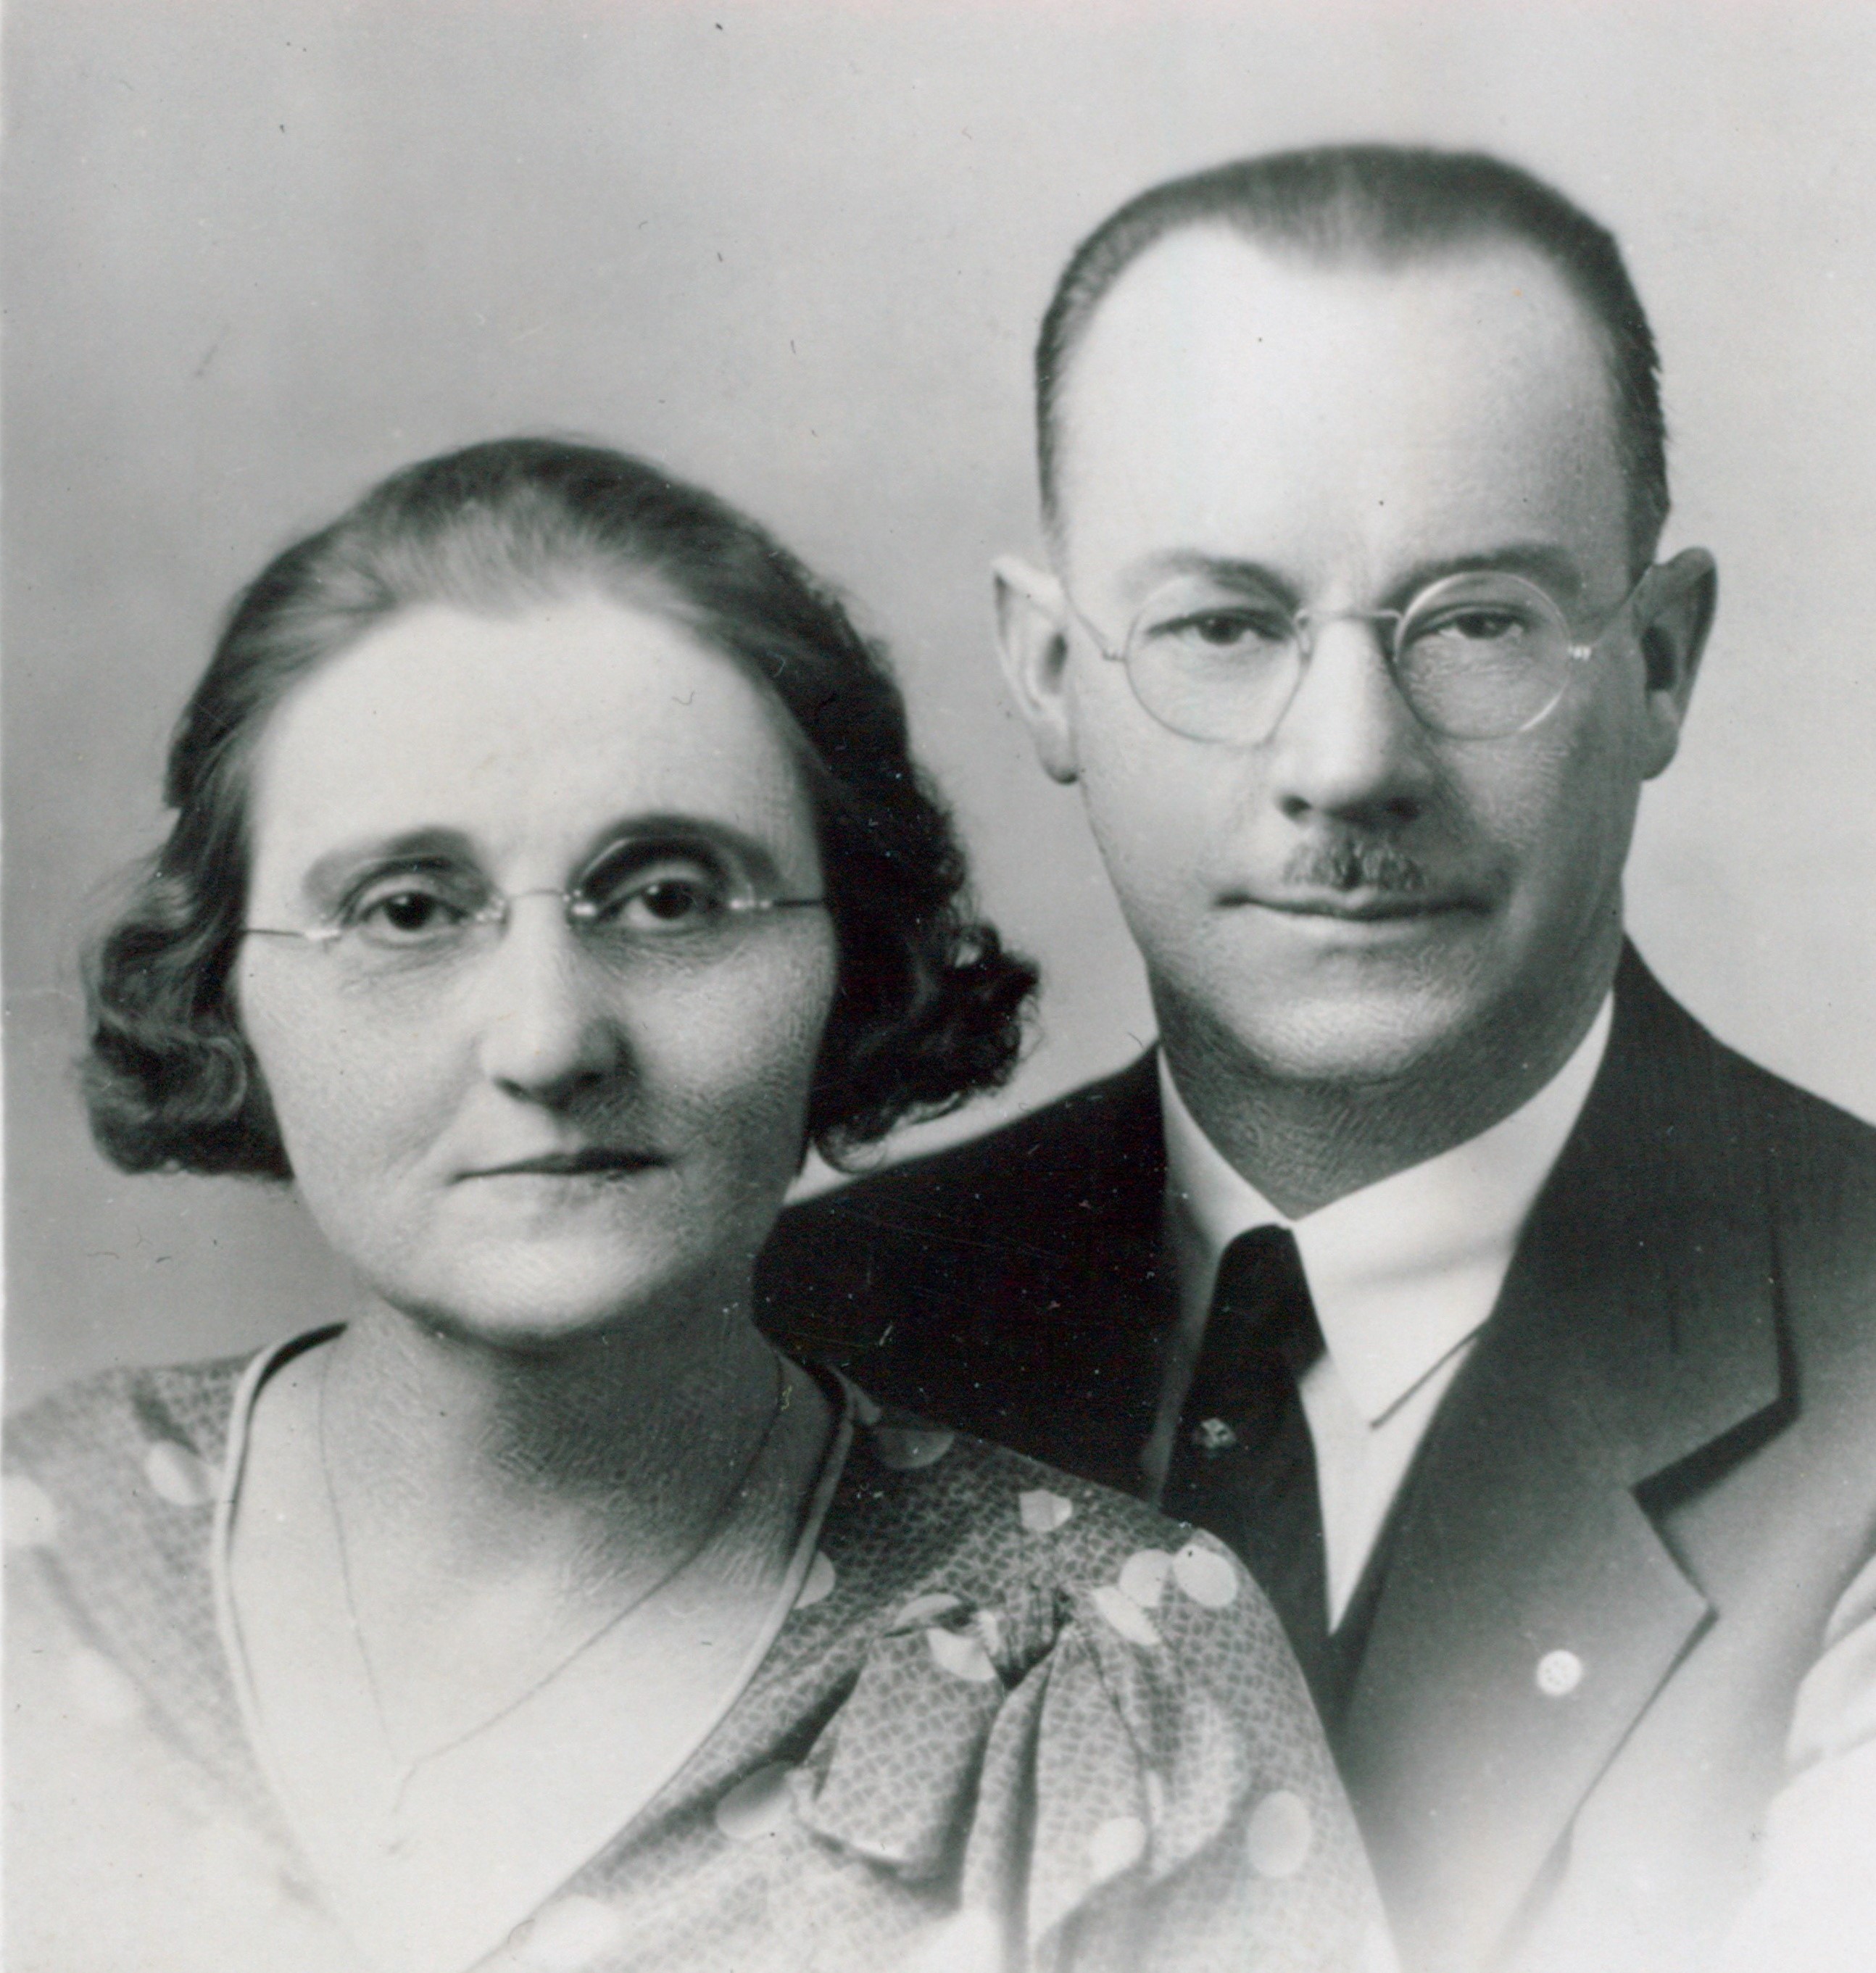 Edward and Hazel served together in the German and Austrian mission